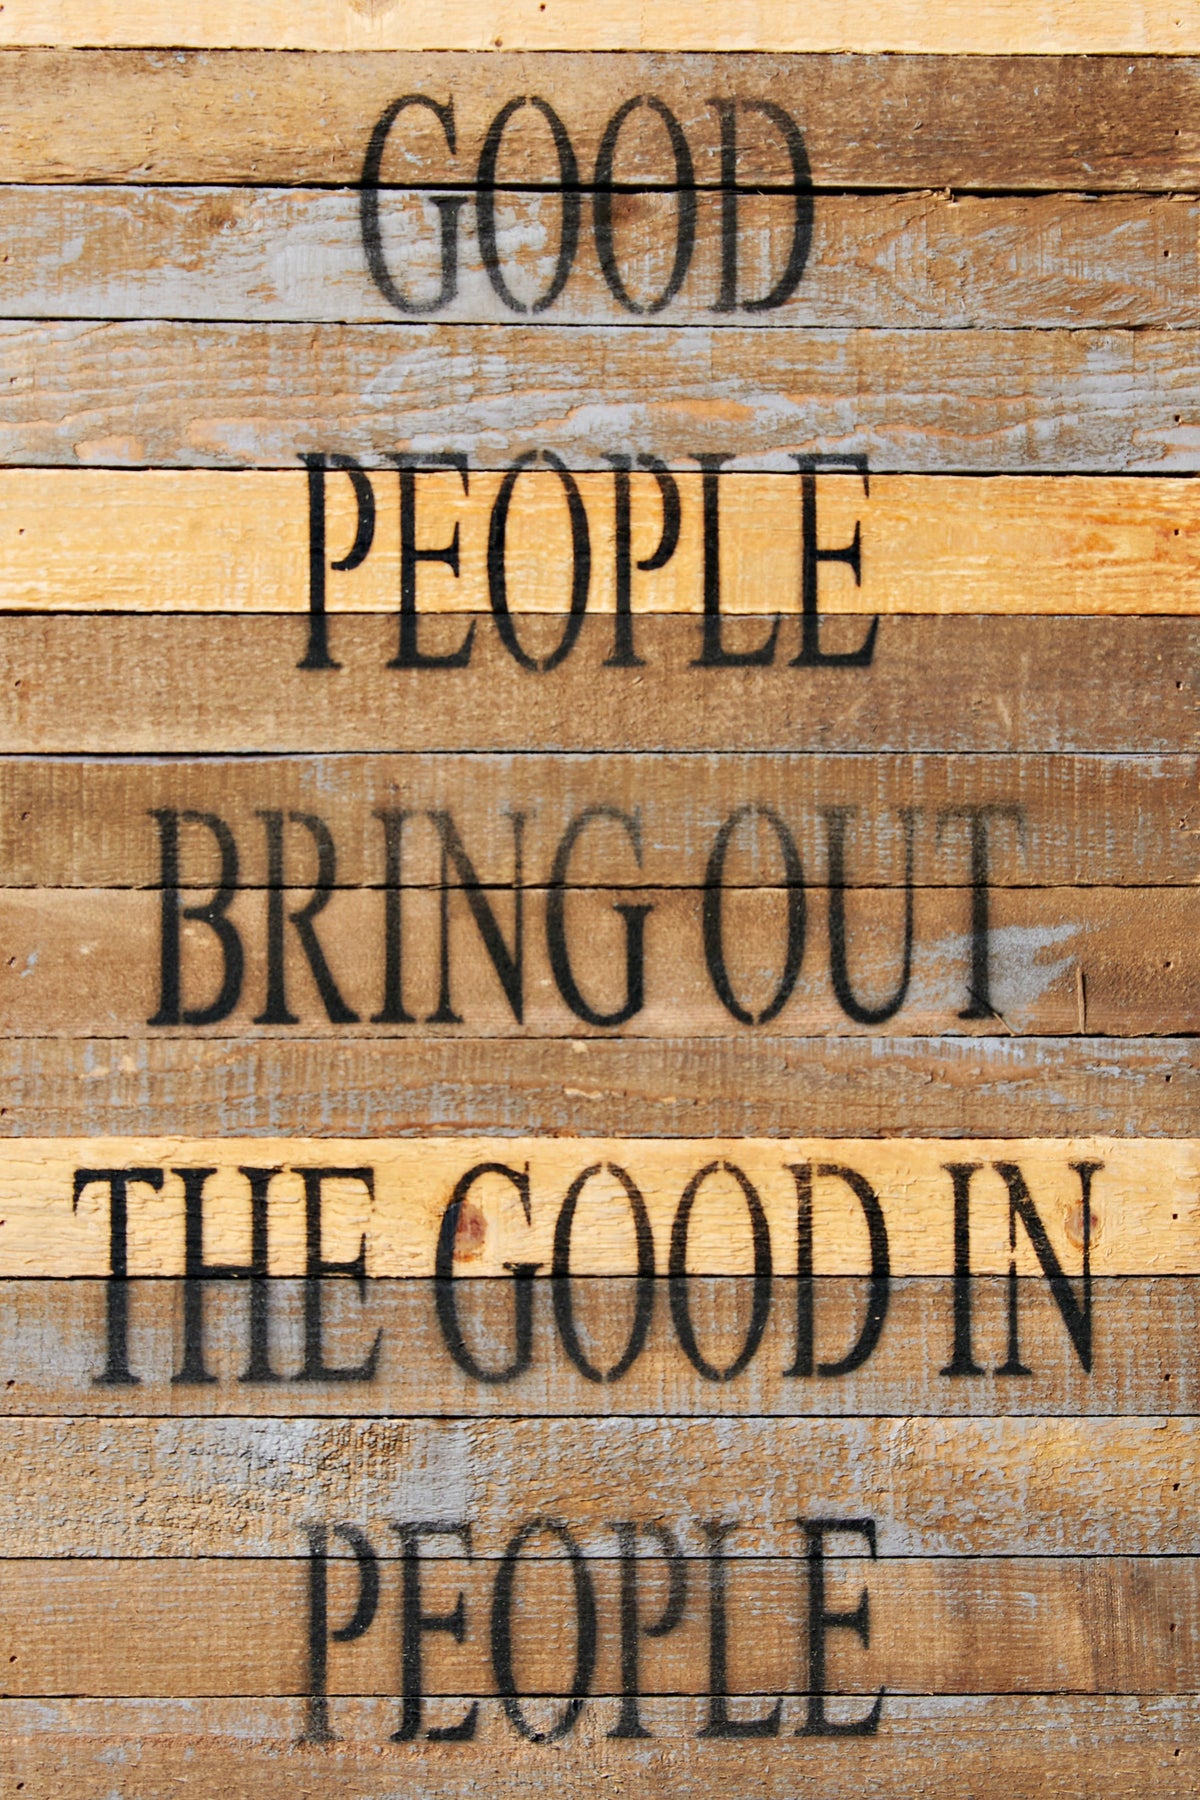 Good people bring out the good in people / 12x18 Reclaimed Wood Wall Art